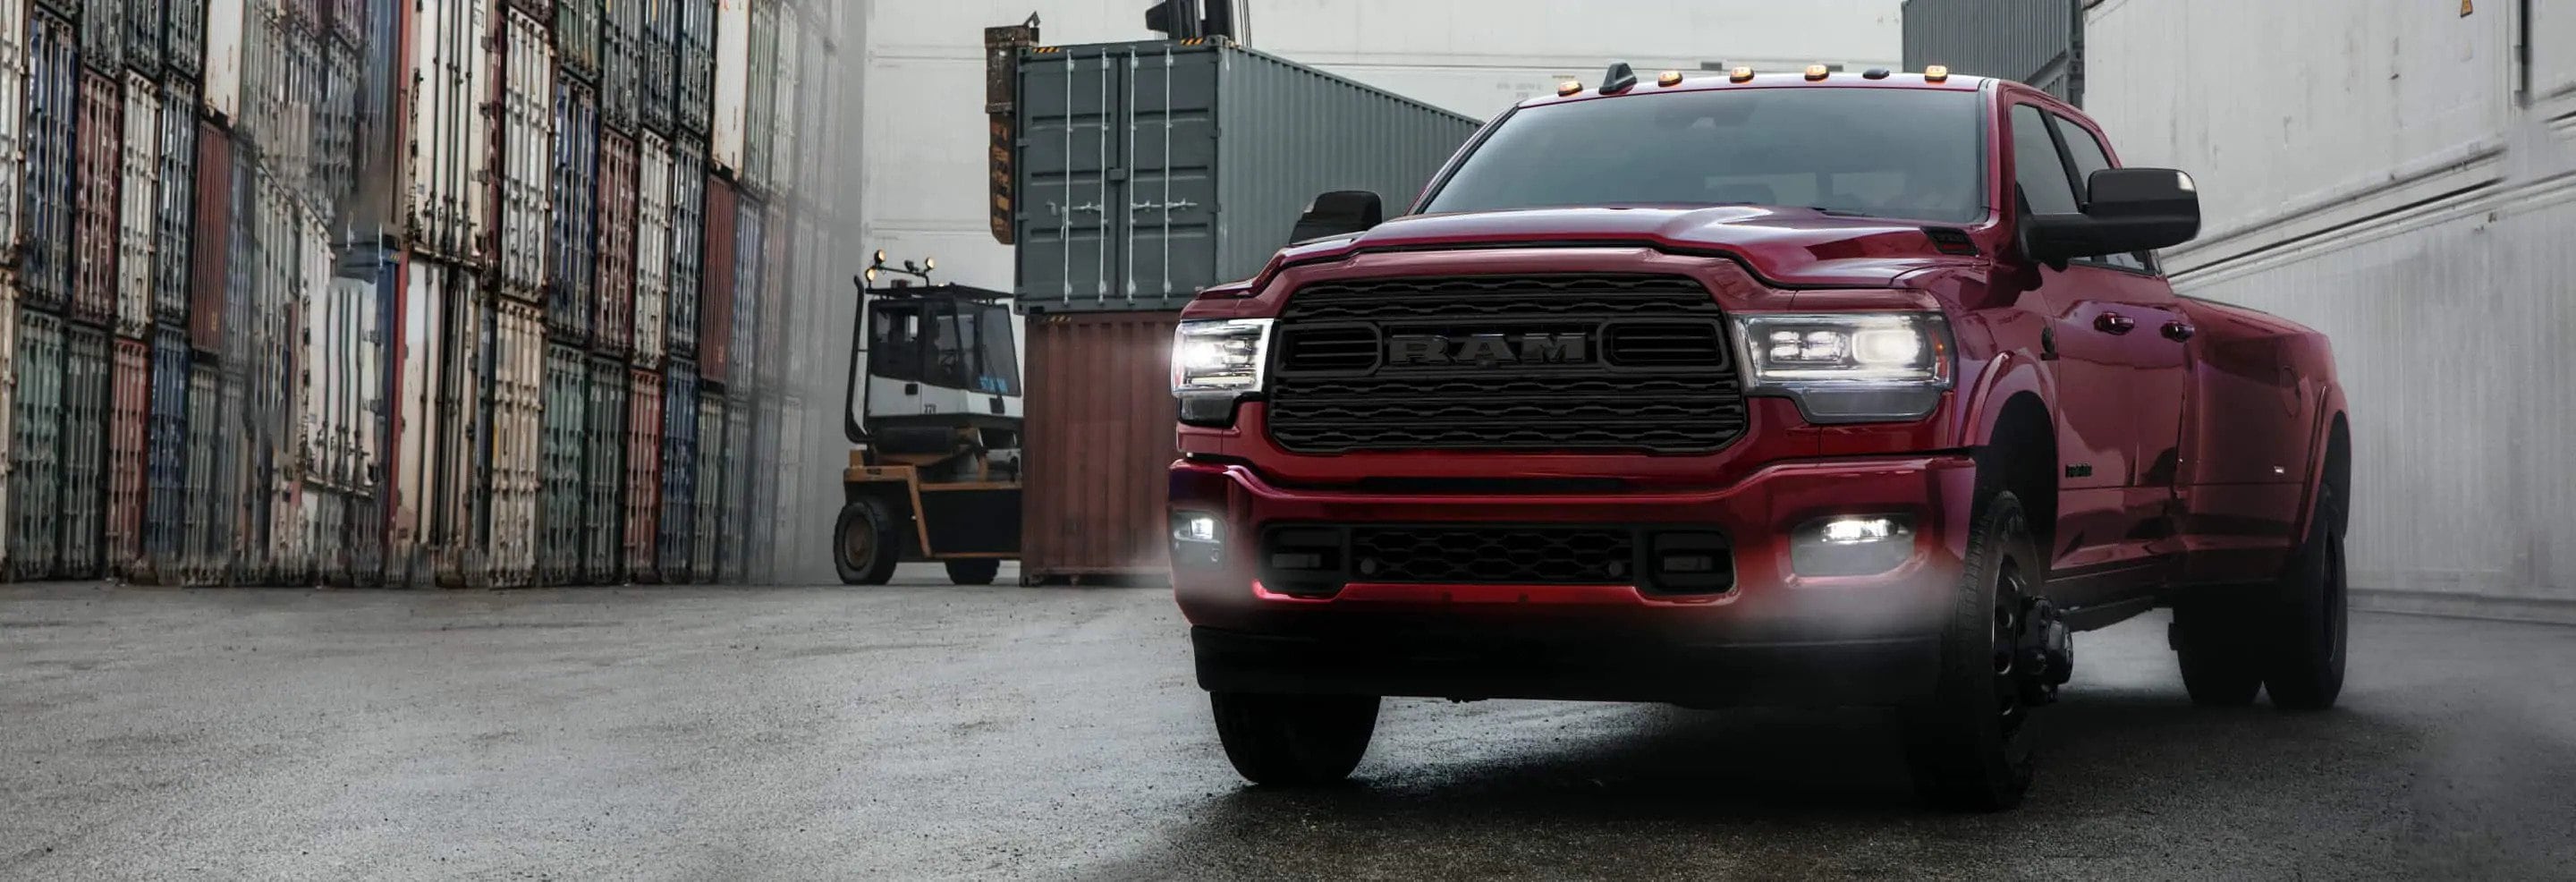 2021 RAM Chassis Cab in Kansas City